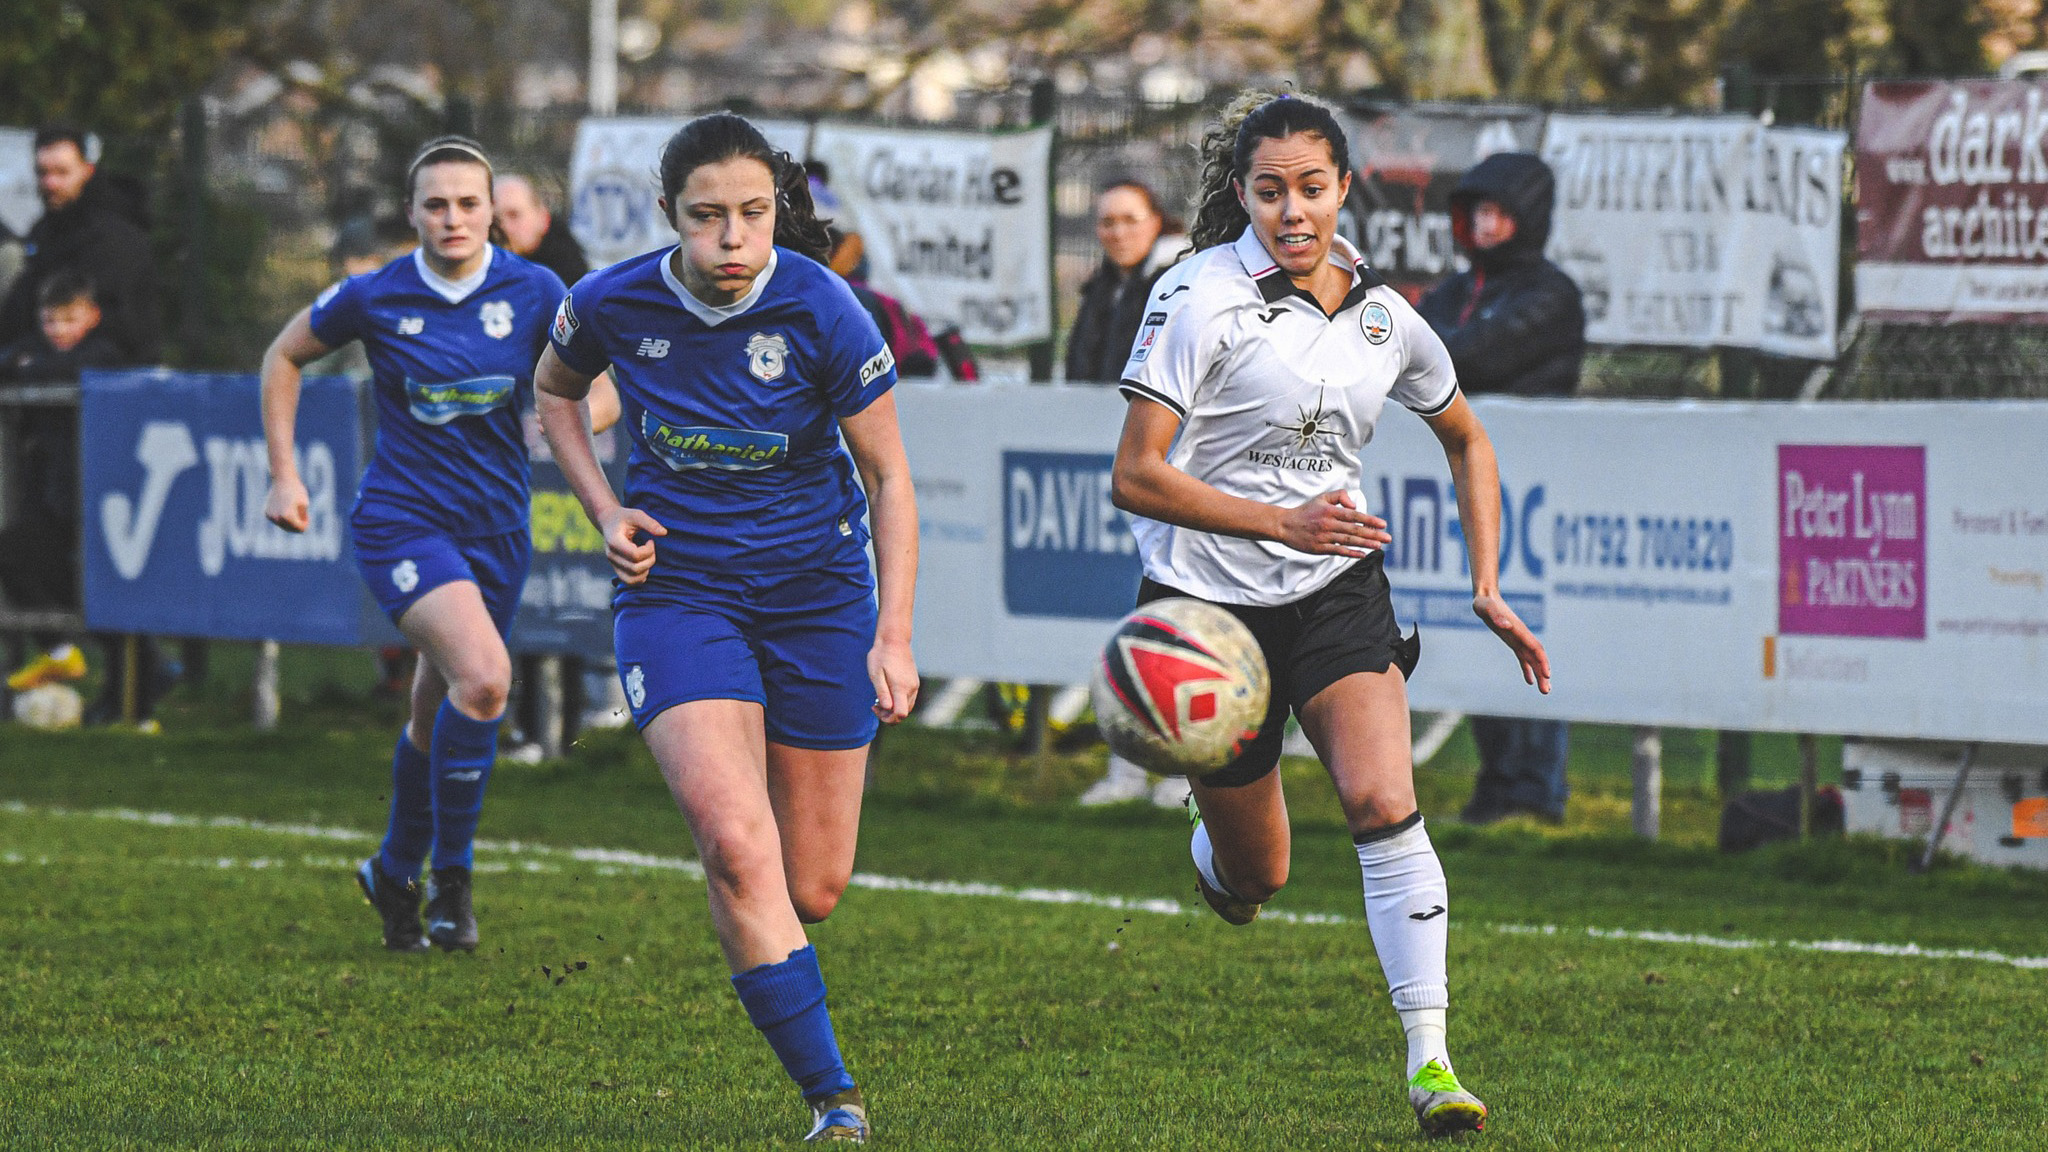 Monet Legall competes for the ball against Cardiff City